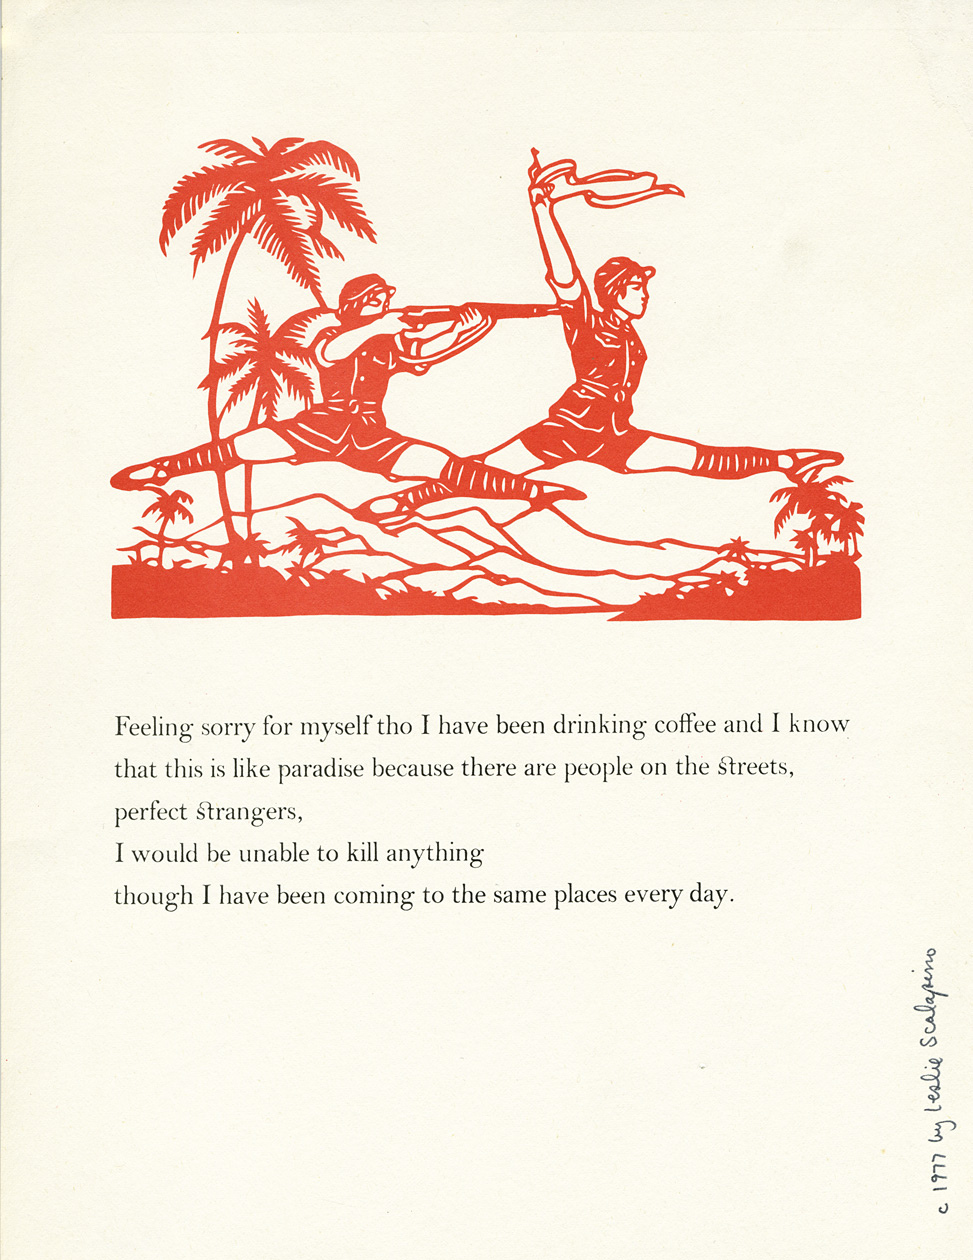 Leslie Scalapino. [Feeling sorry for myself tho I have been drinking coffee...], N.p., 1977. Broadside. 8 1/2 x 11 inches. Signed and dated by the poet.